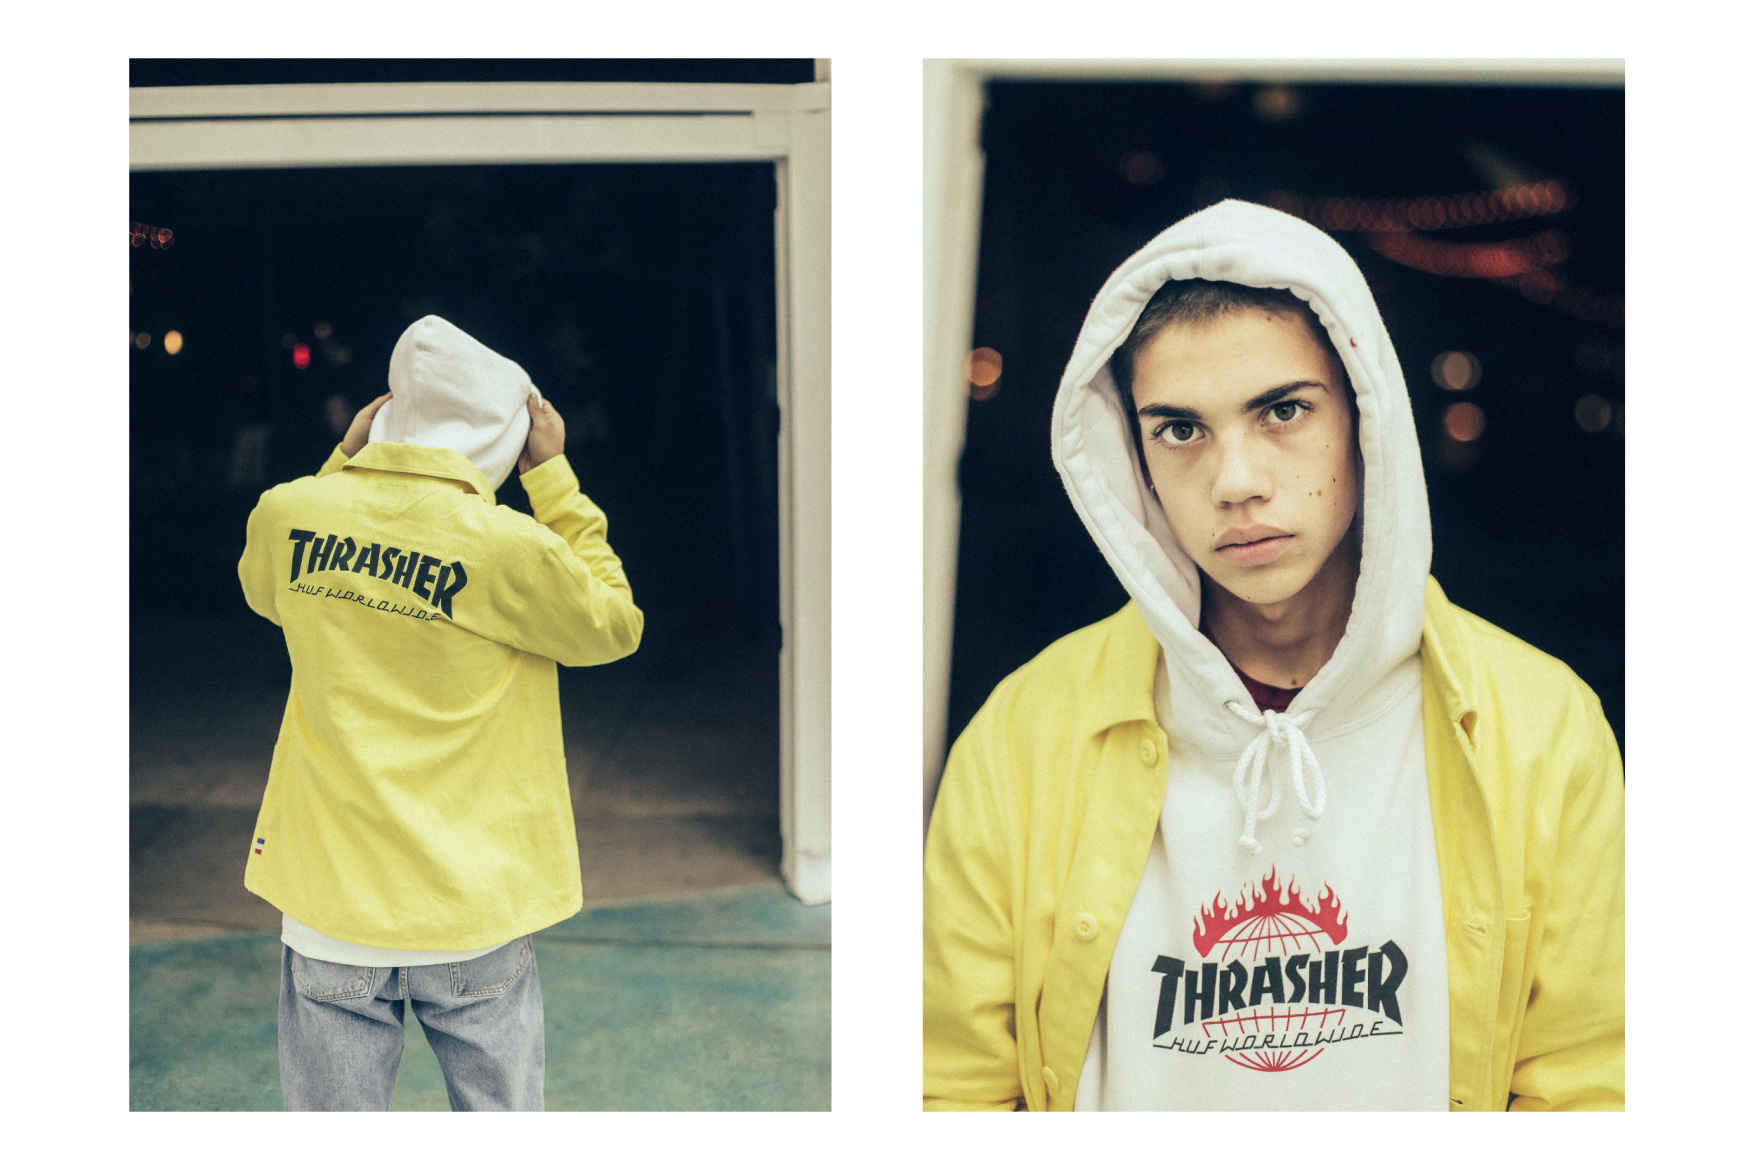 Huf x Thrasher - TRENDS periodical